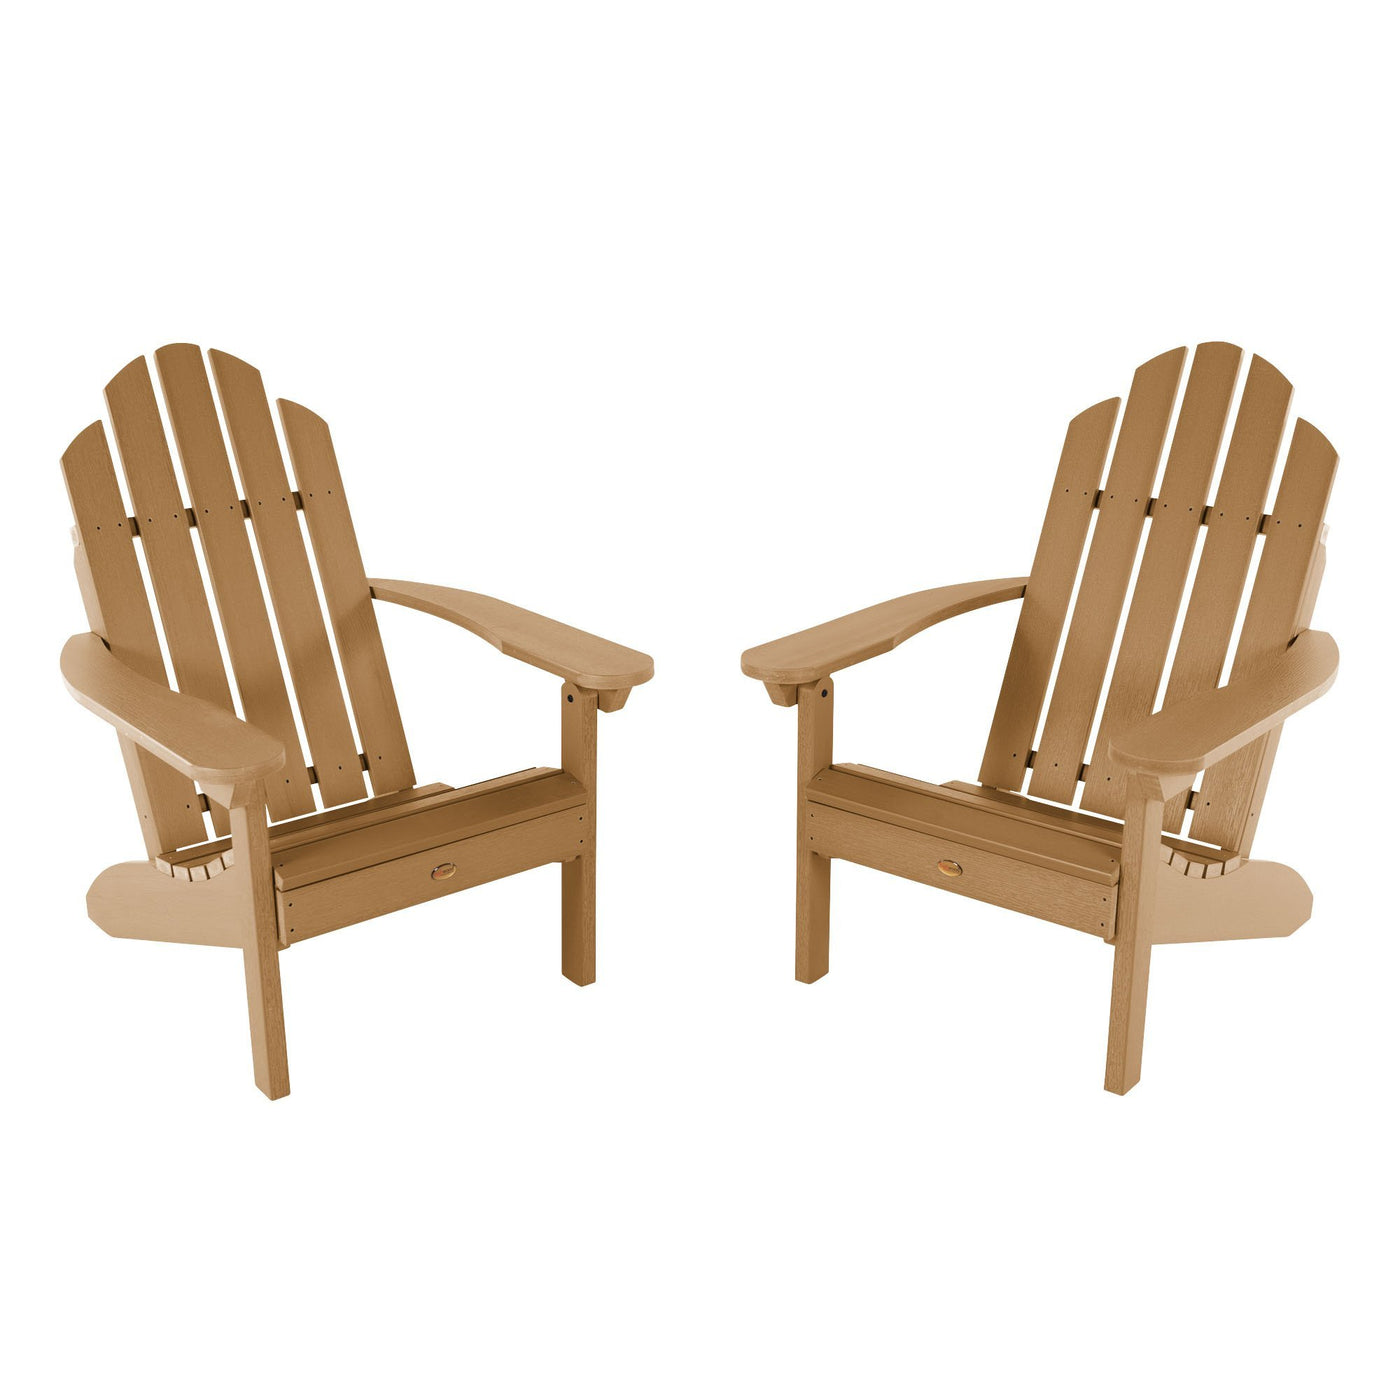 Set of Two Classic Westport Adirondack Chairs Highwood USA Toffee 